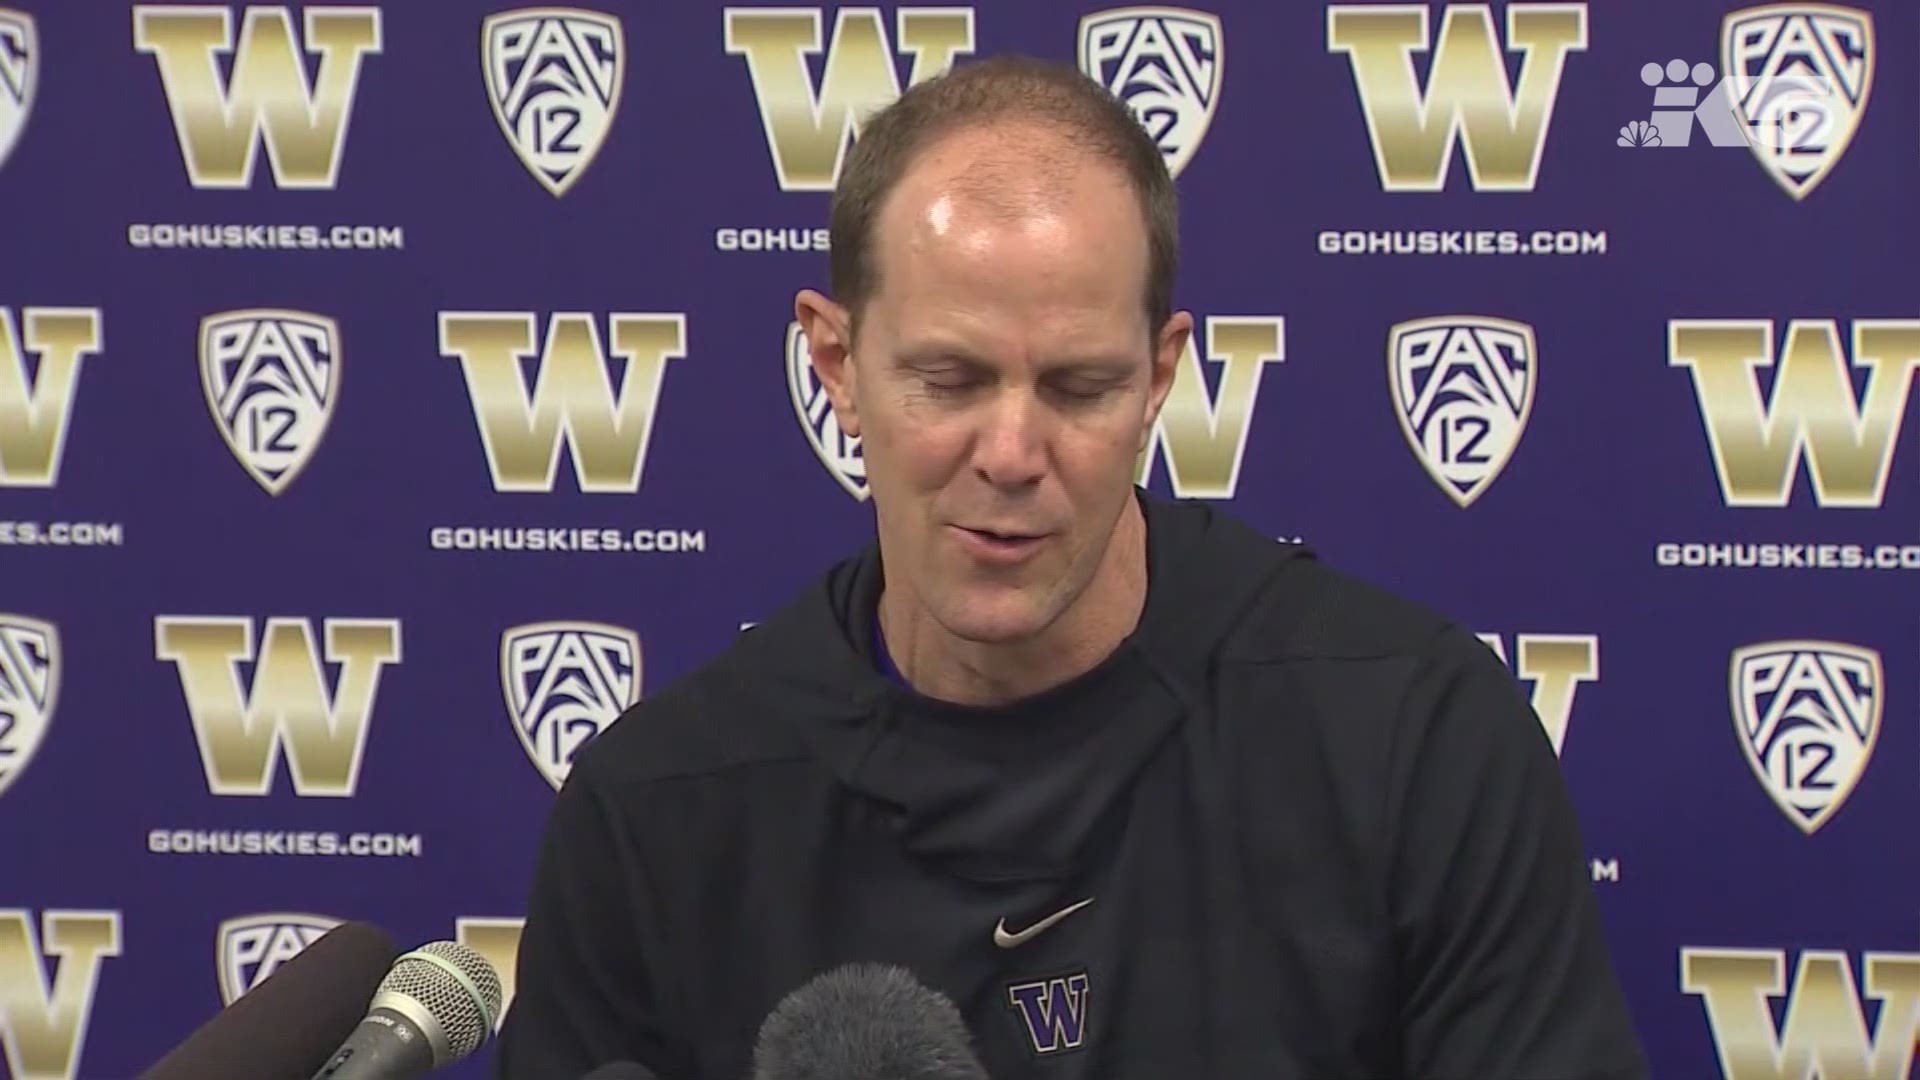 UW men’s basketball coach Mike Hopkins on inspiring his players during the NCAA tournament.